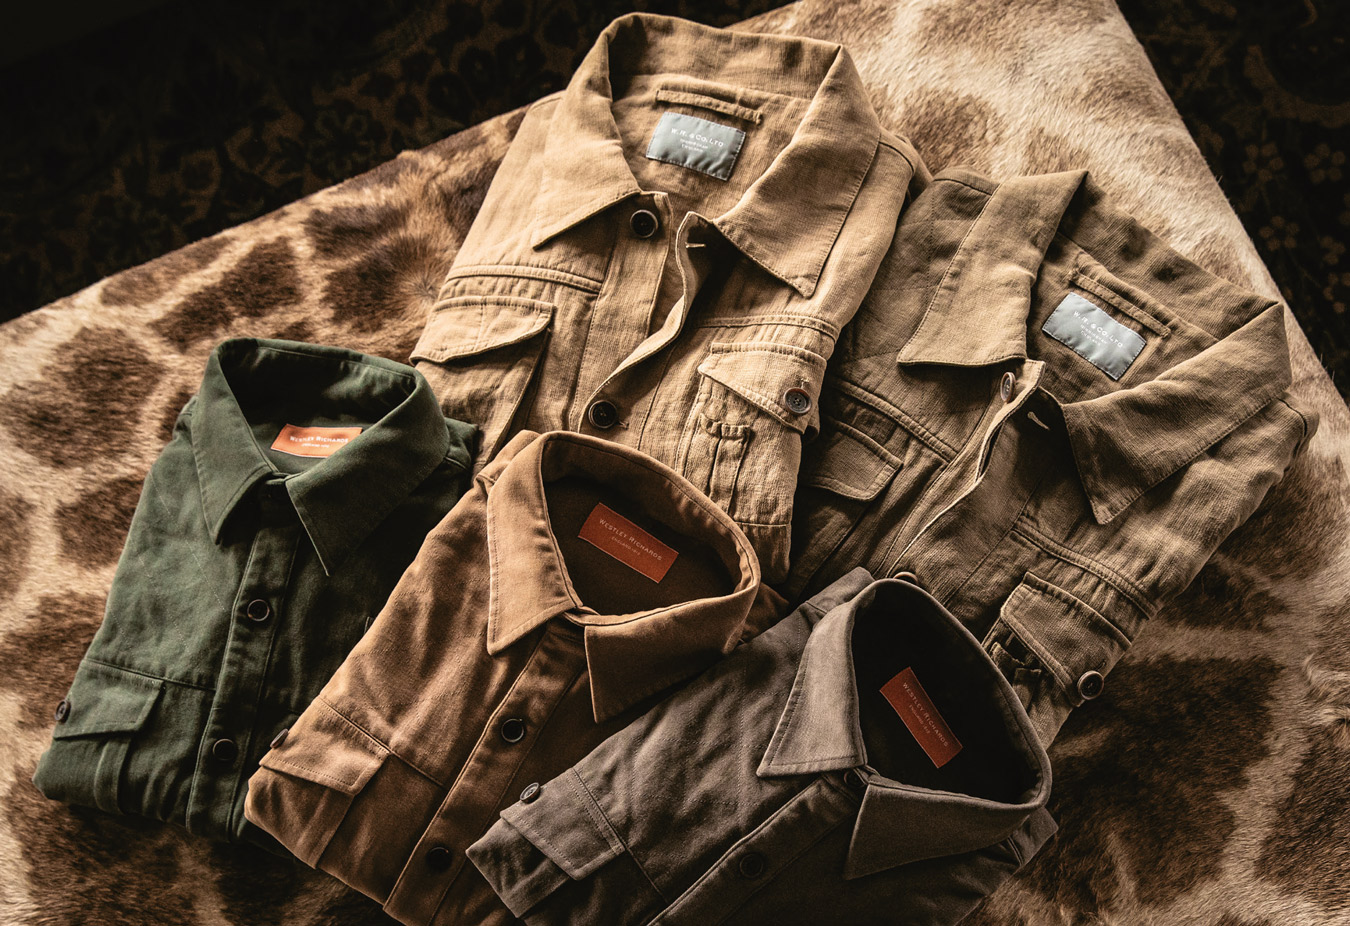 Quality Hunting & Safari Clothes For Men - Westley Richards